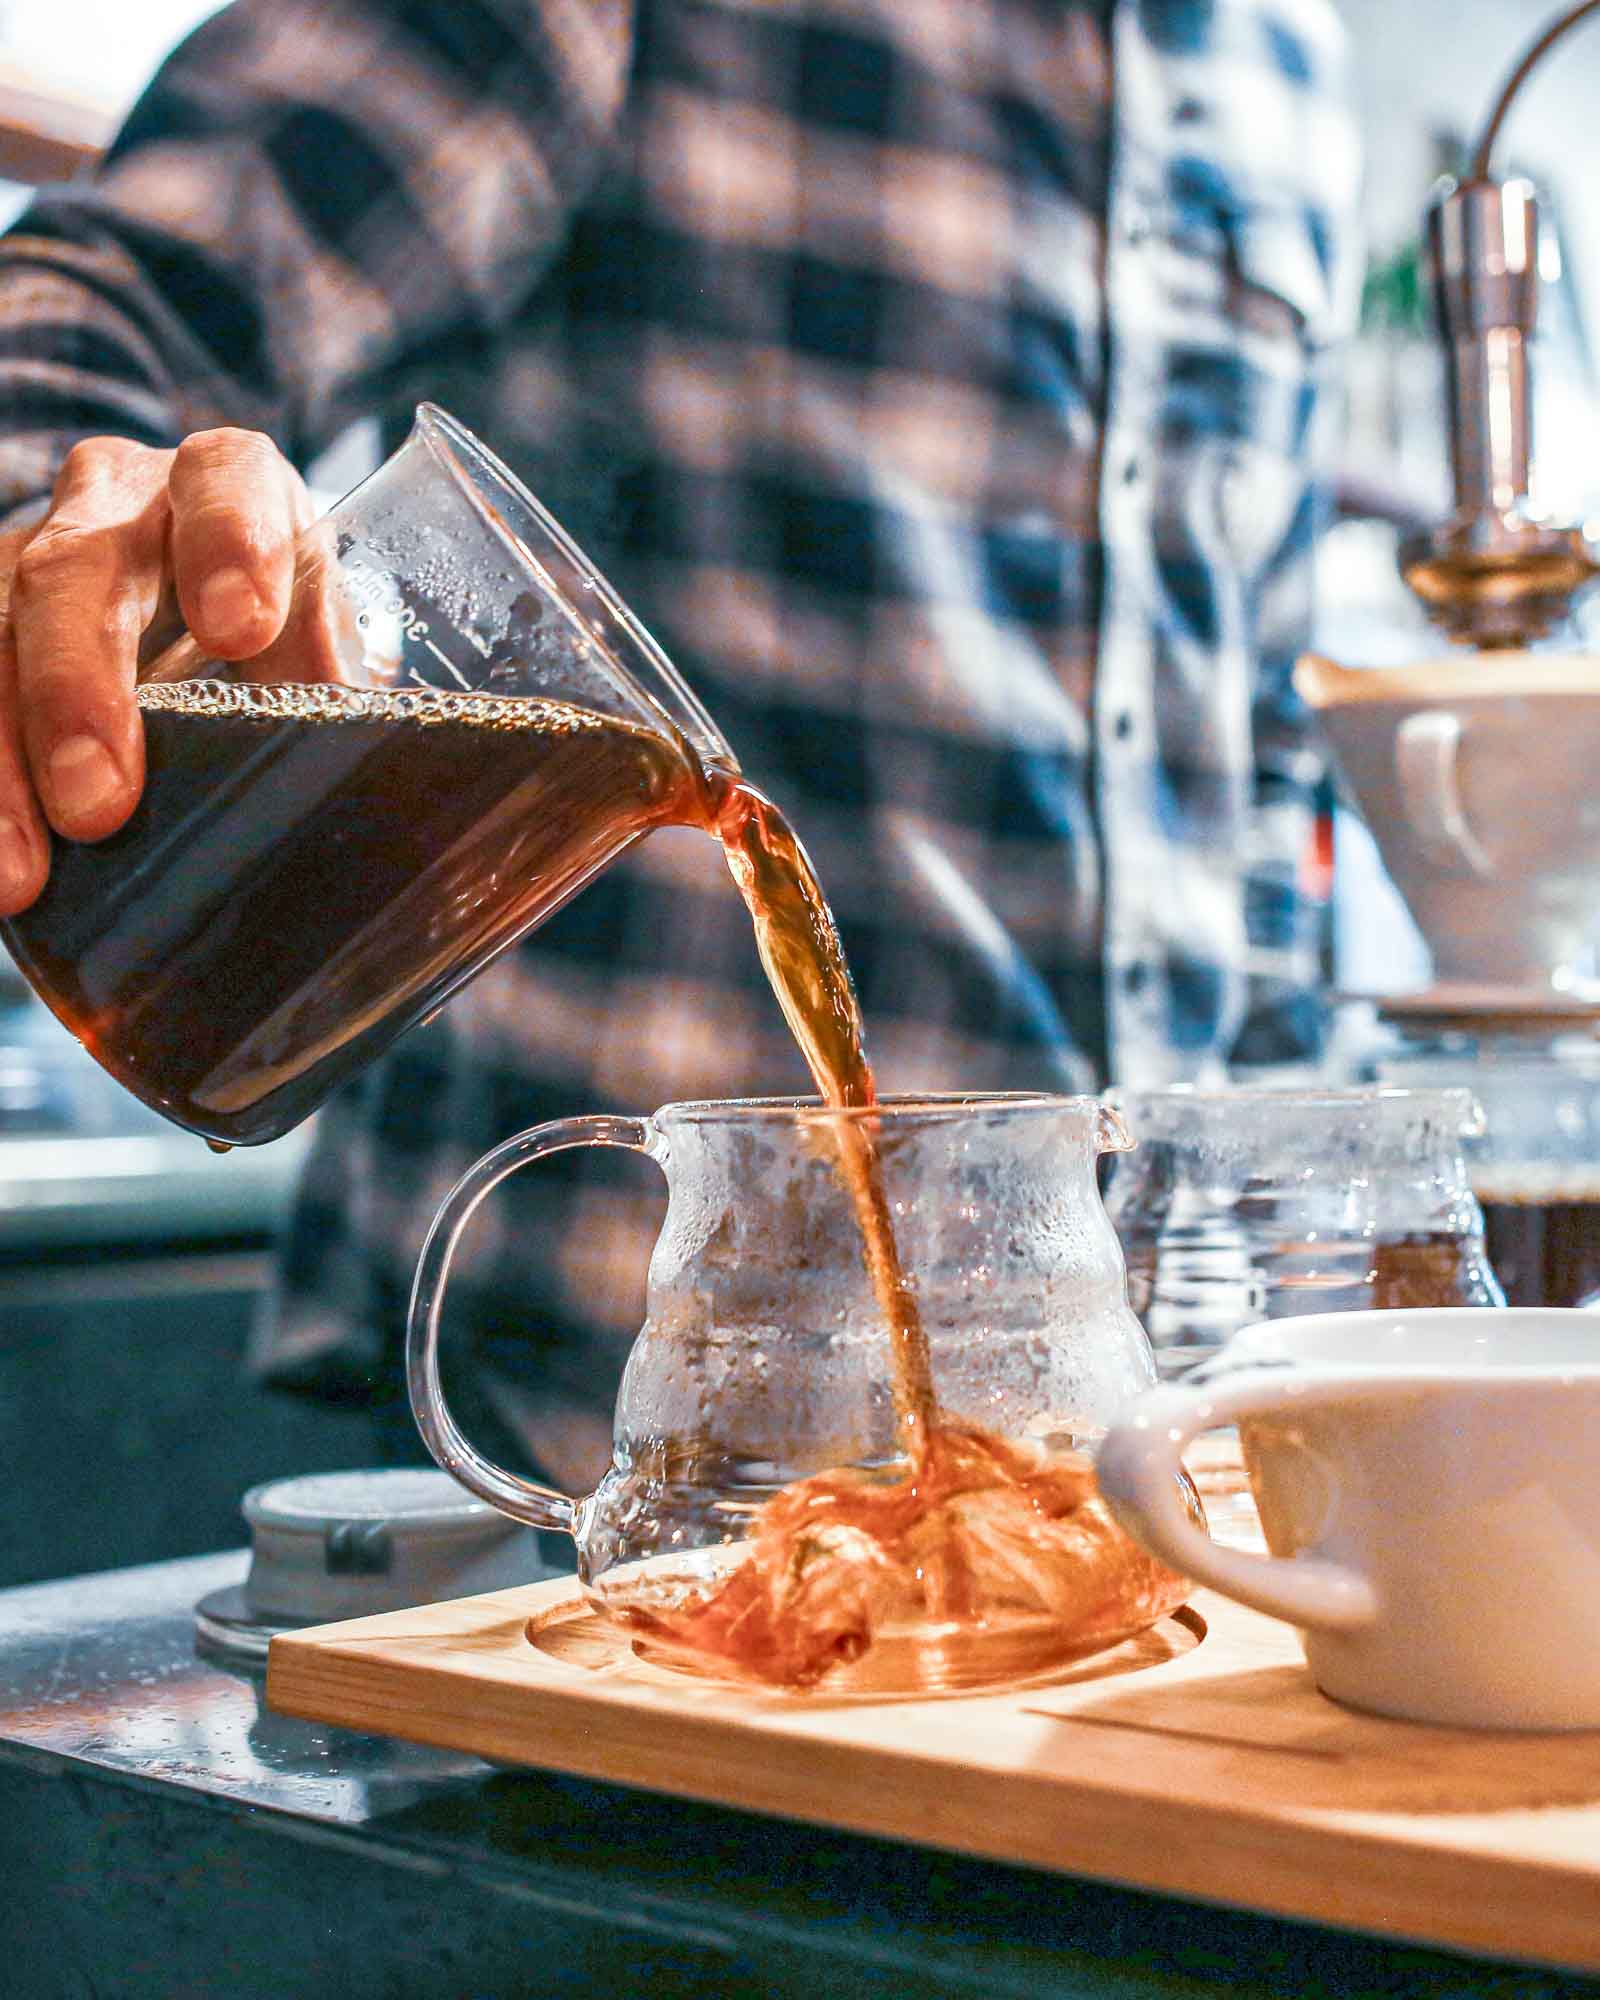 A specialty pour-over coffee being poured